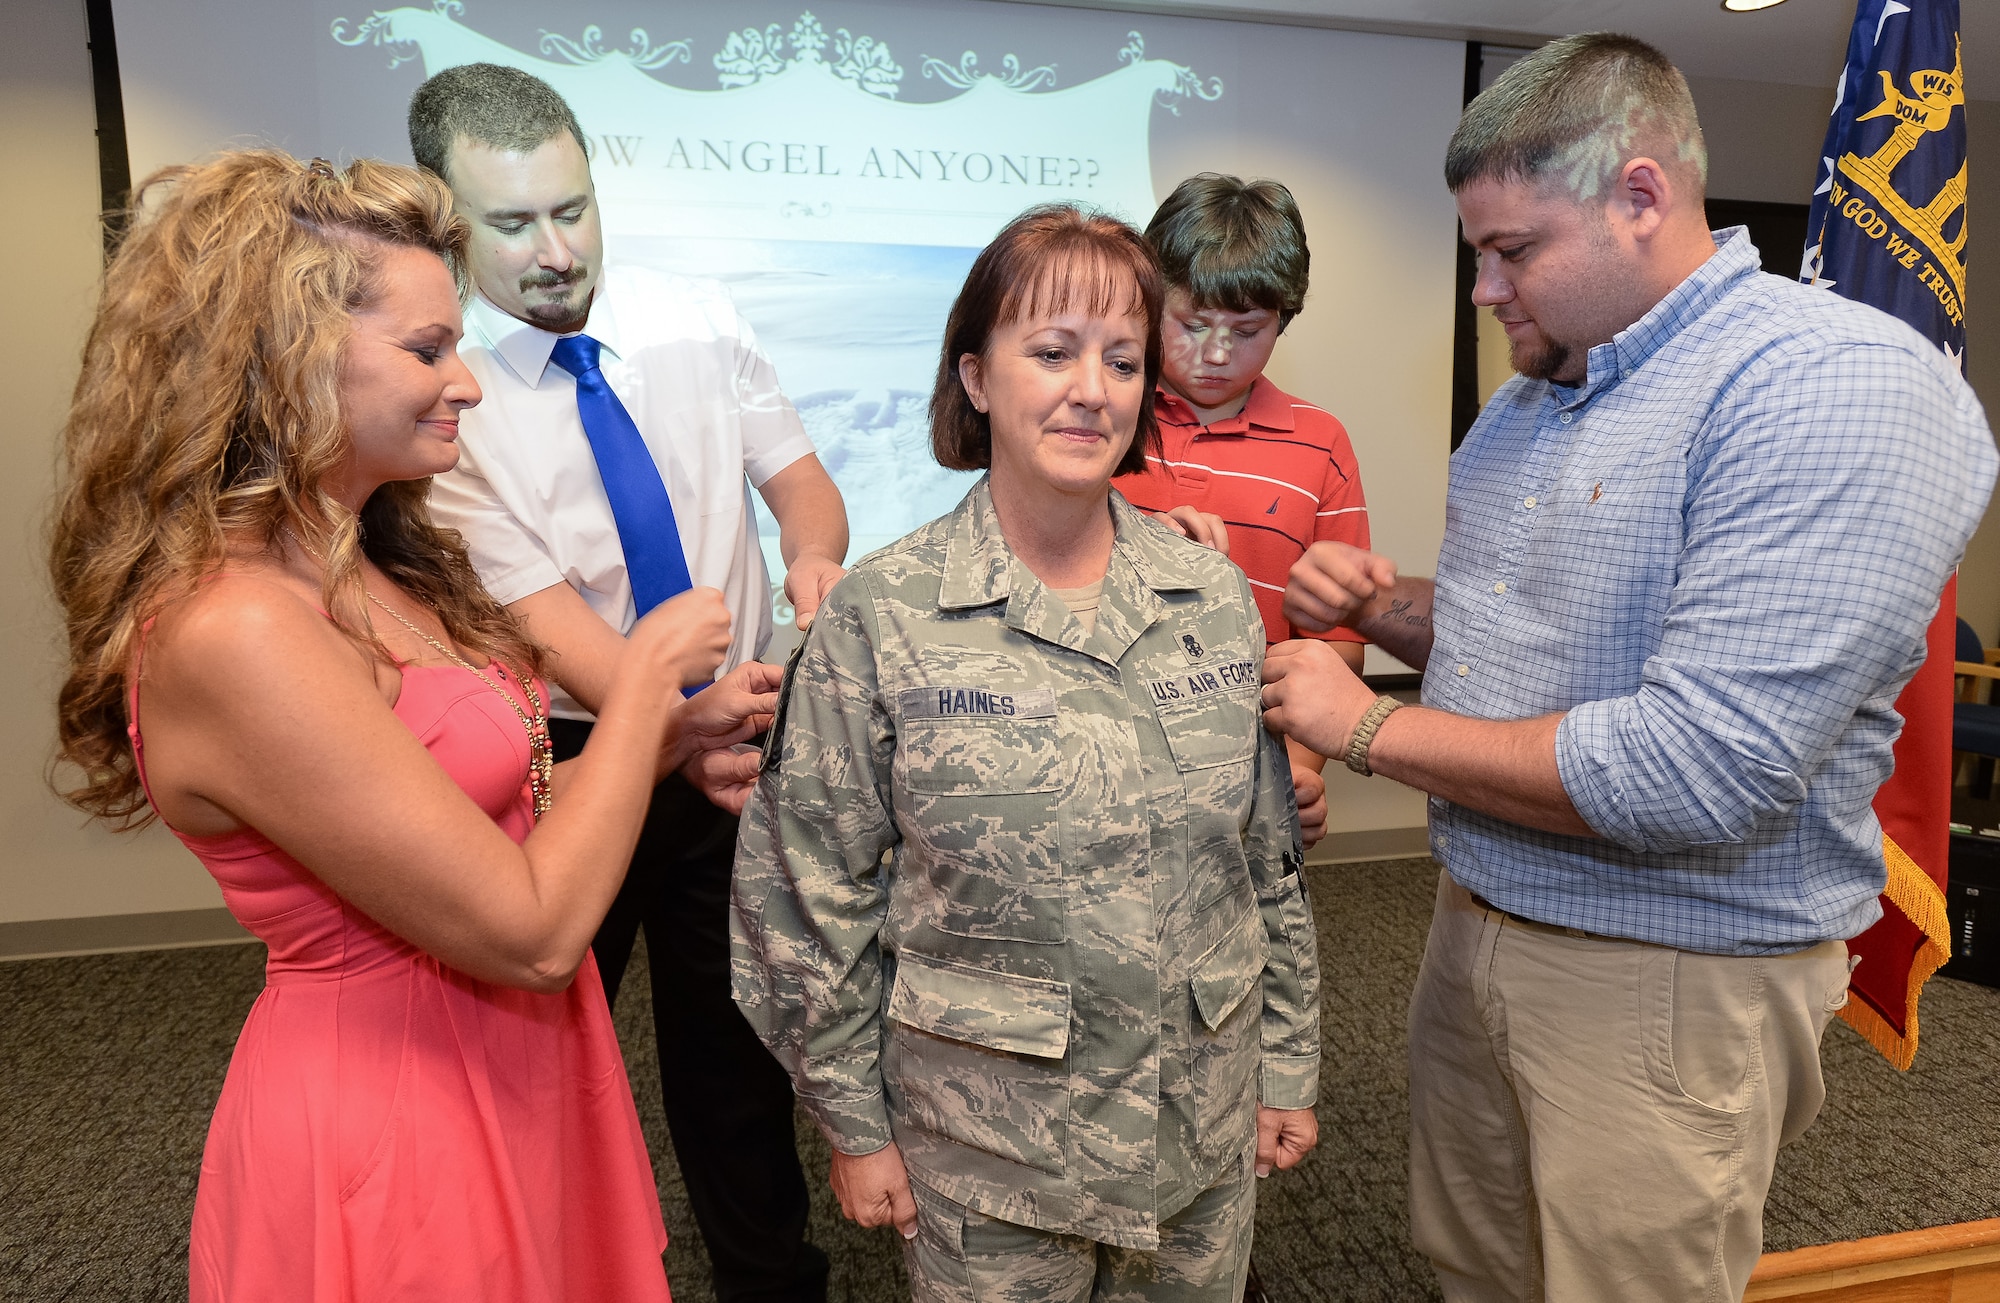 U.S. Air Force Chief Master Sgt. Cynthia Haines, 116th Medical Group (MDG) superintendent of nursing services,  Georgia Air National Guard, has her new stripes ceremonially pinned on by her family during her promotion ceremony, Robins Air Force Base, Ga., June 21, 2014. Haines became the first female to be promoted to Chief Master Sgt. in the history of the 116th MDG. The 116th MDG is the medical arm of the 116th Air Control Wing.  (U.S. Air National Guard photo by Master Sgt. Roger Parsons/Released)